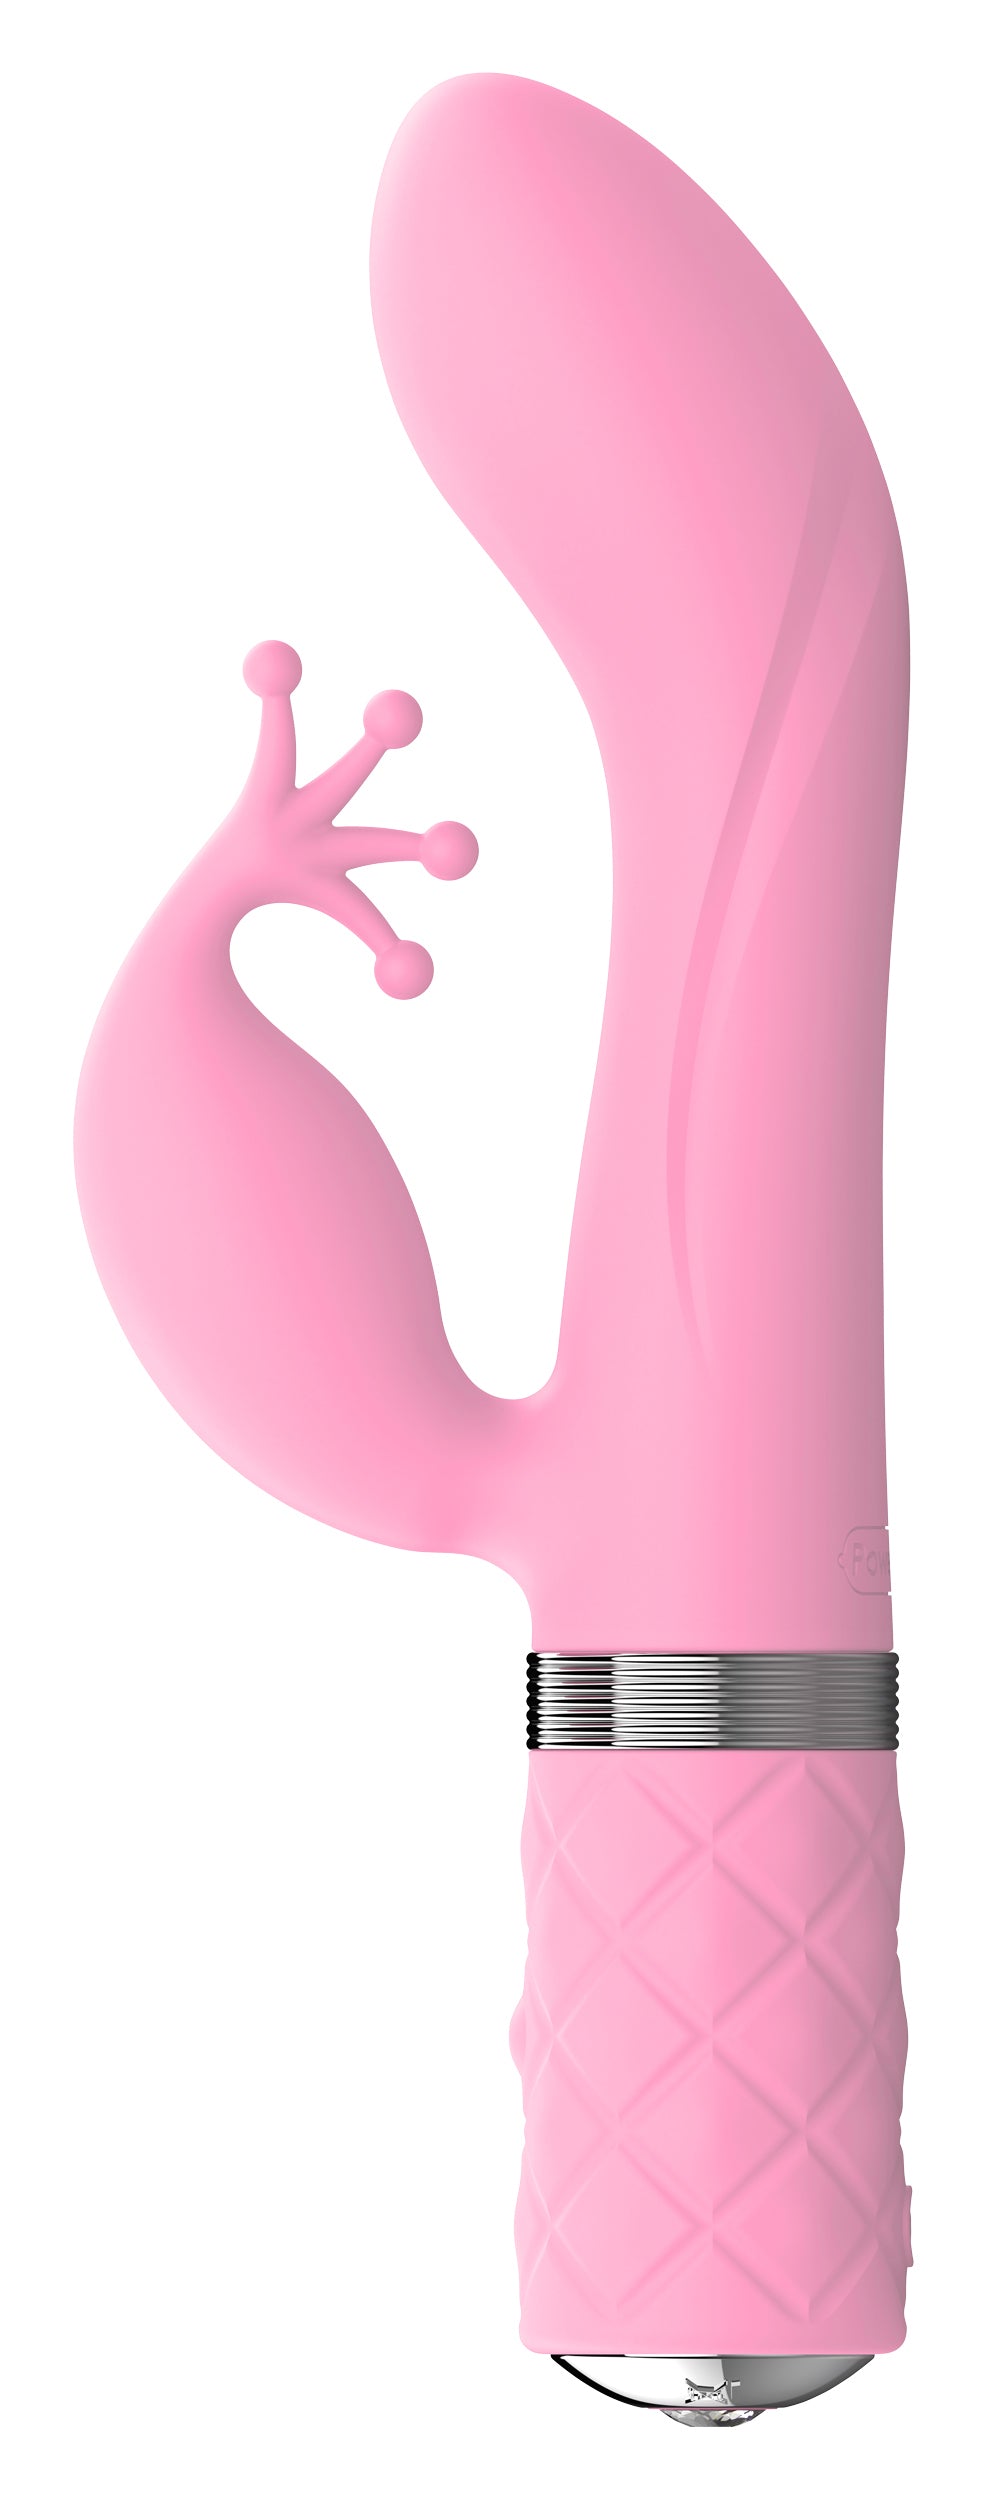 Pillow Talk Kinky Clitoral Stimulator With Swarovski Crystal Pink - Just for you desires